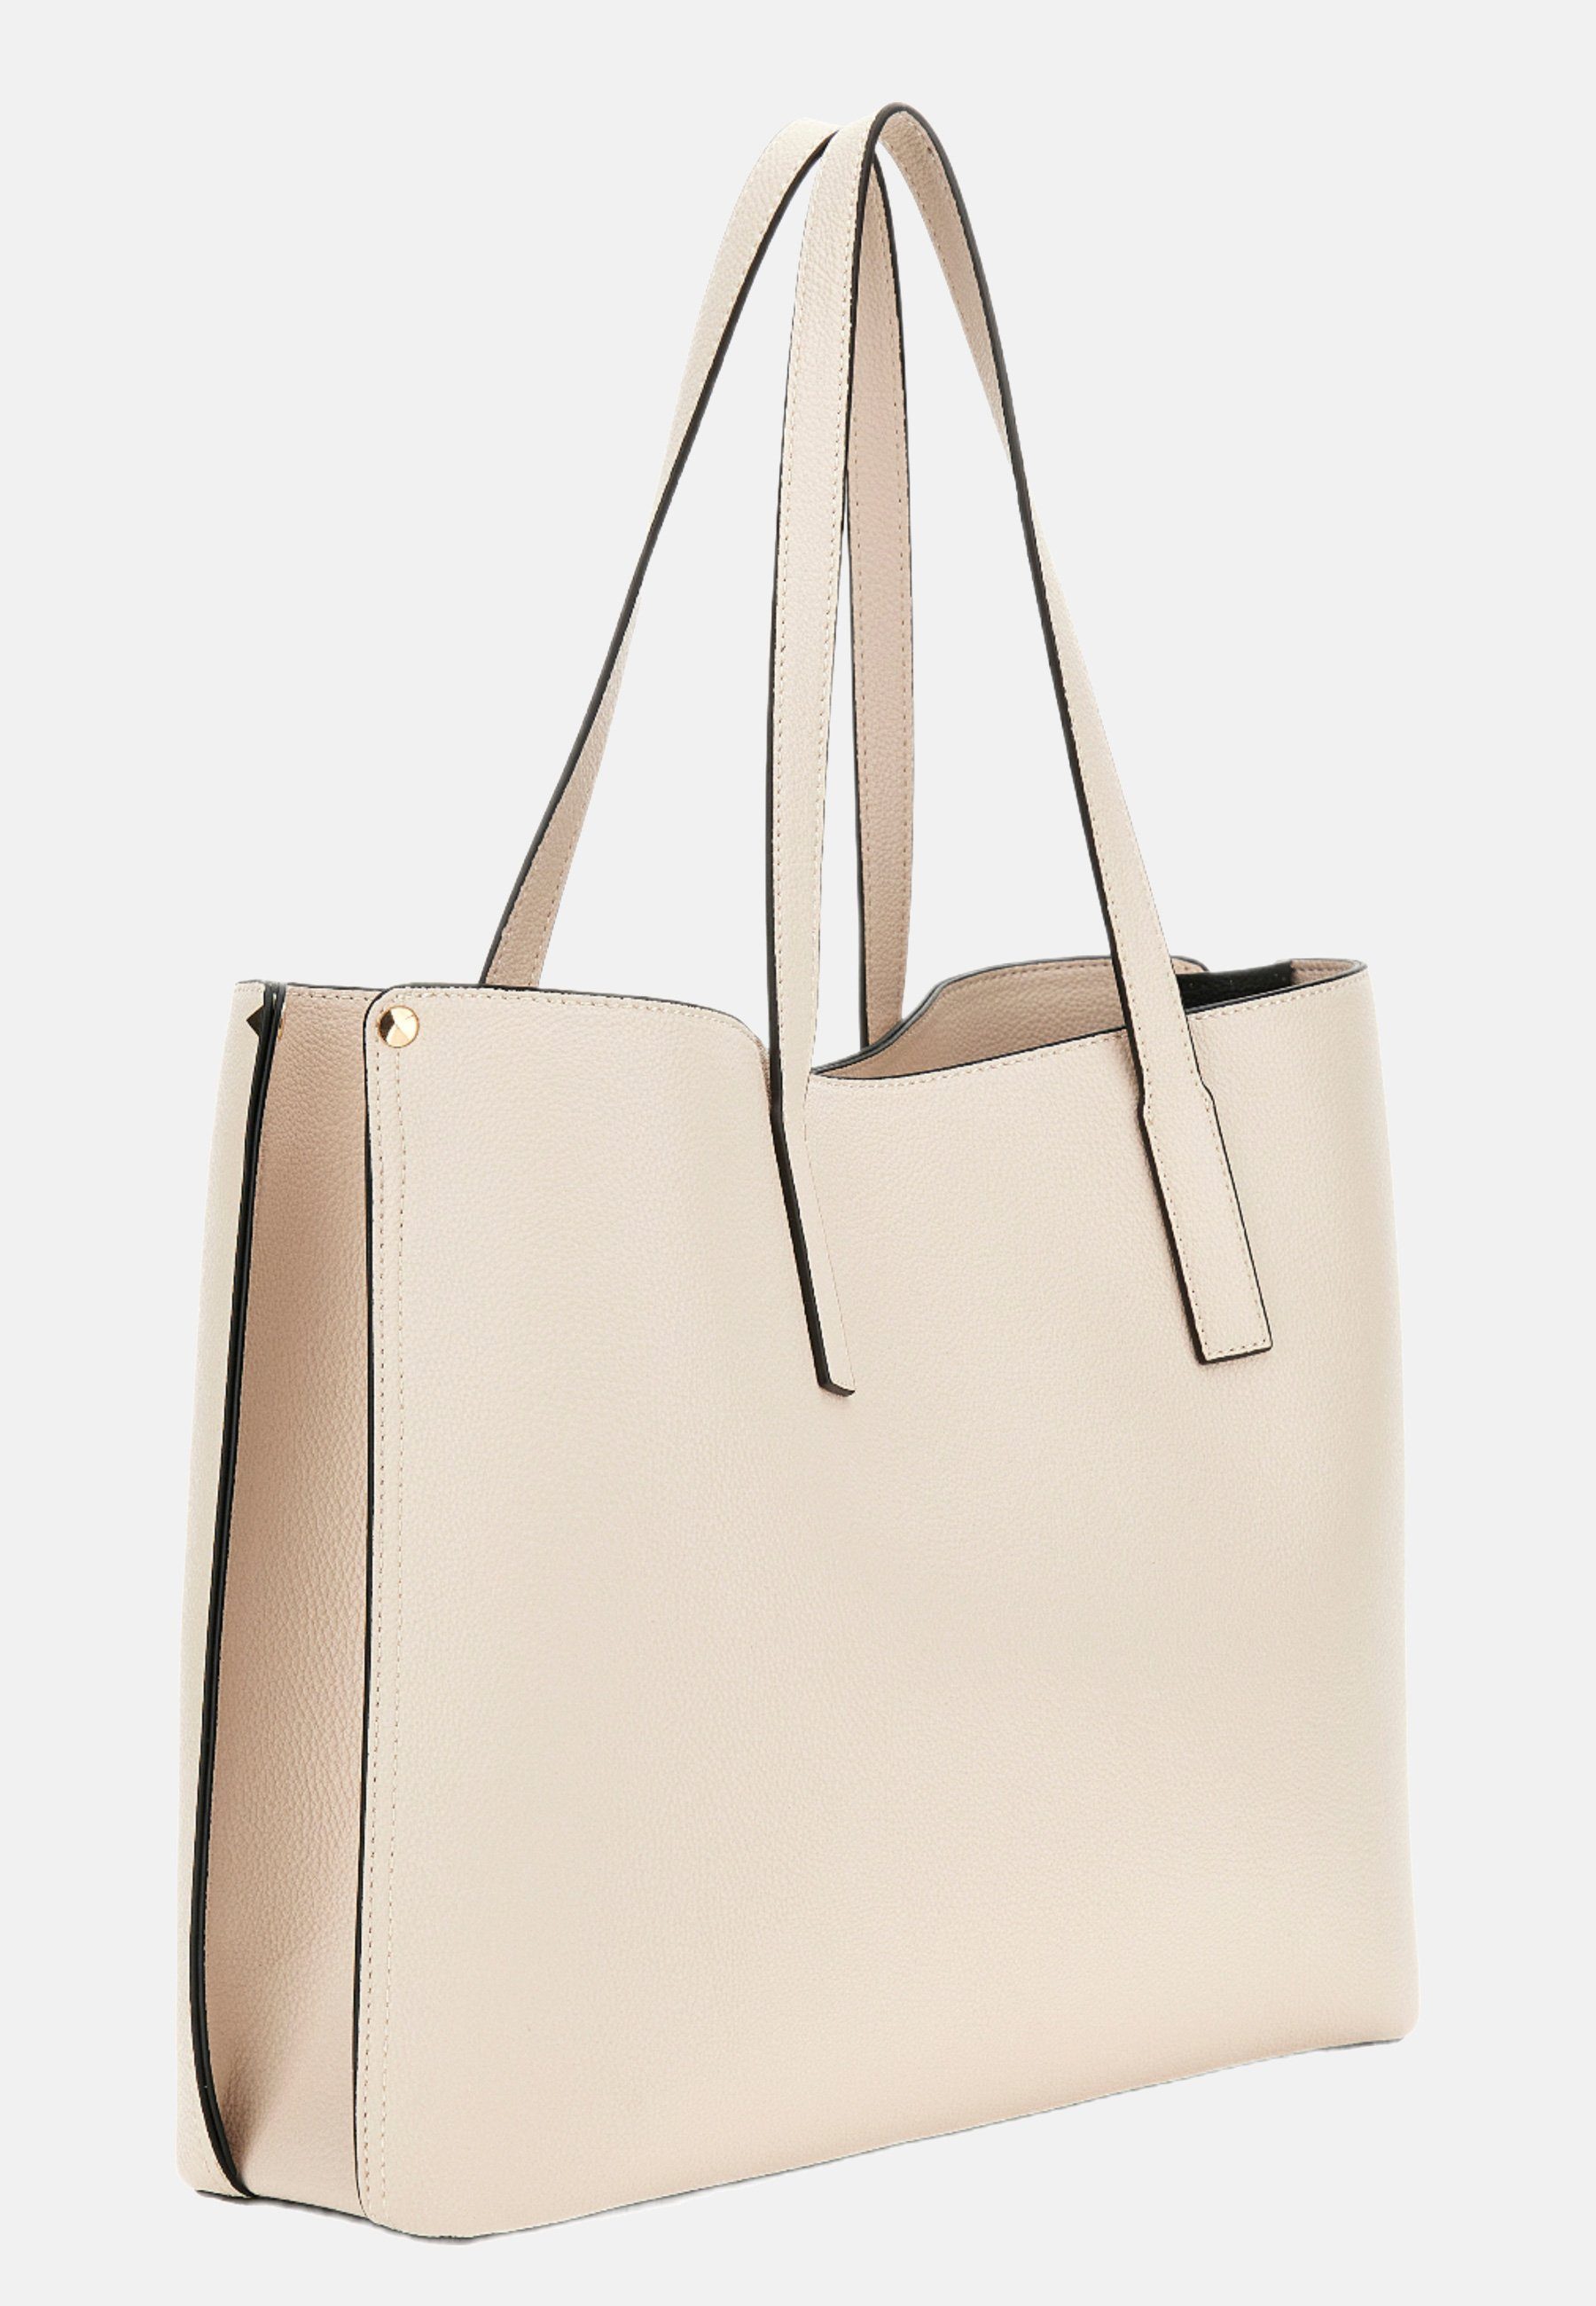 Guess Schultertasche Meridian Girlfriend Tote stone